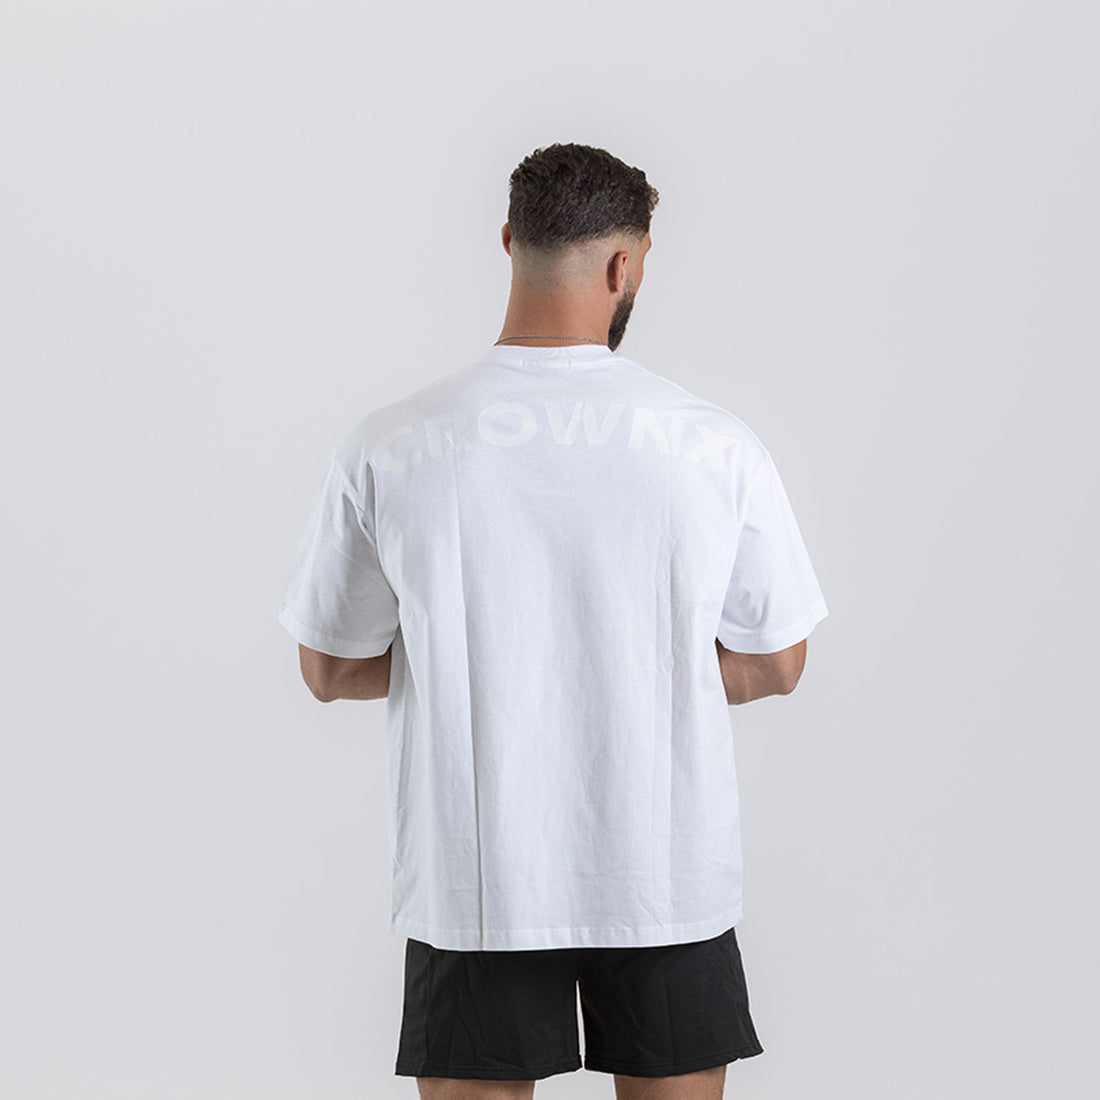 OVERSIZE LIMITLESS WHITE